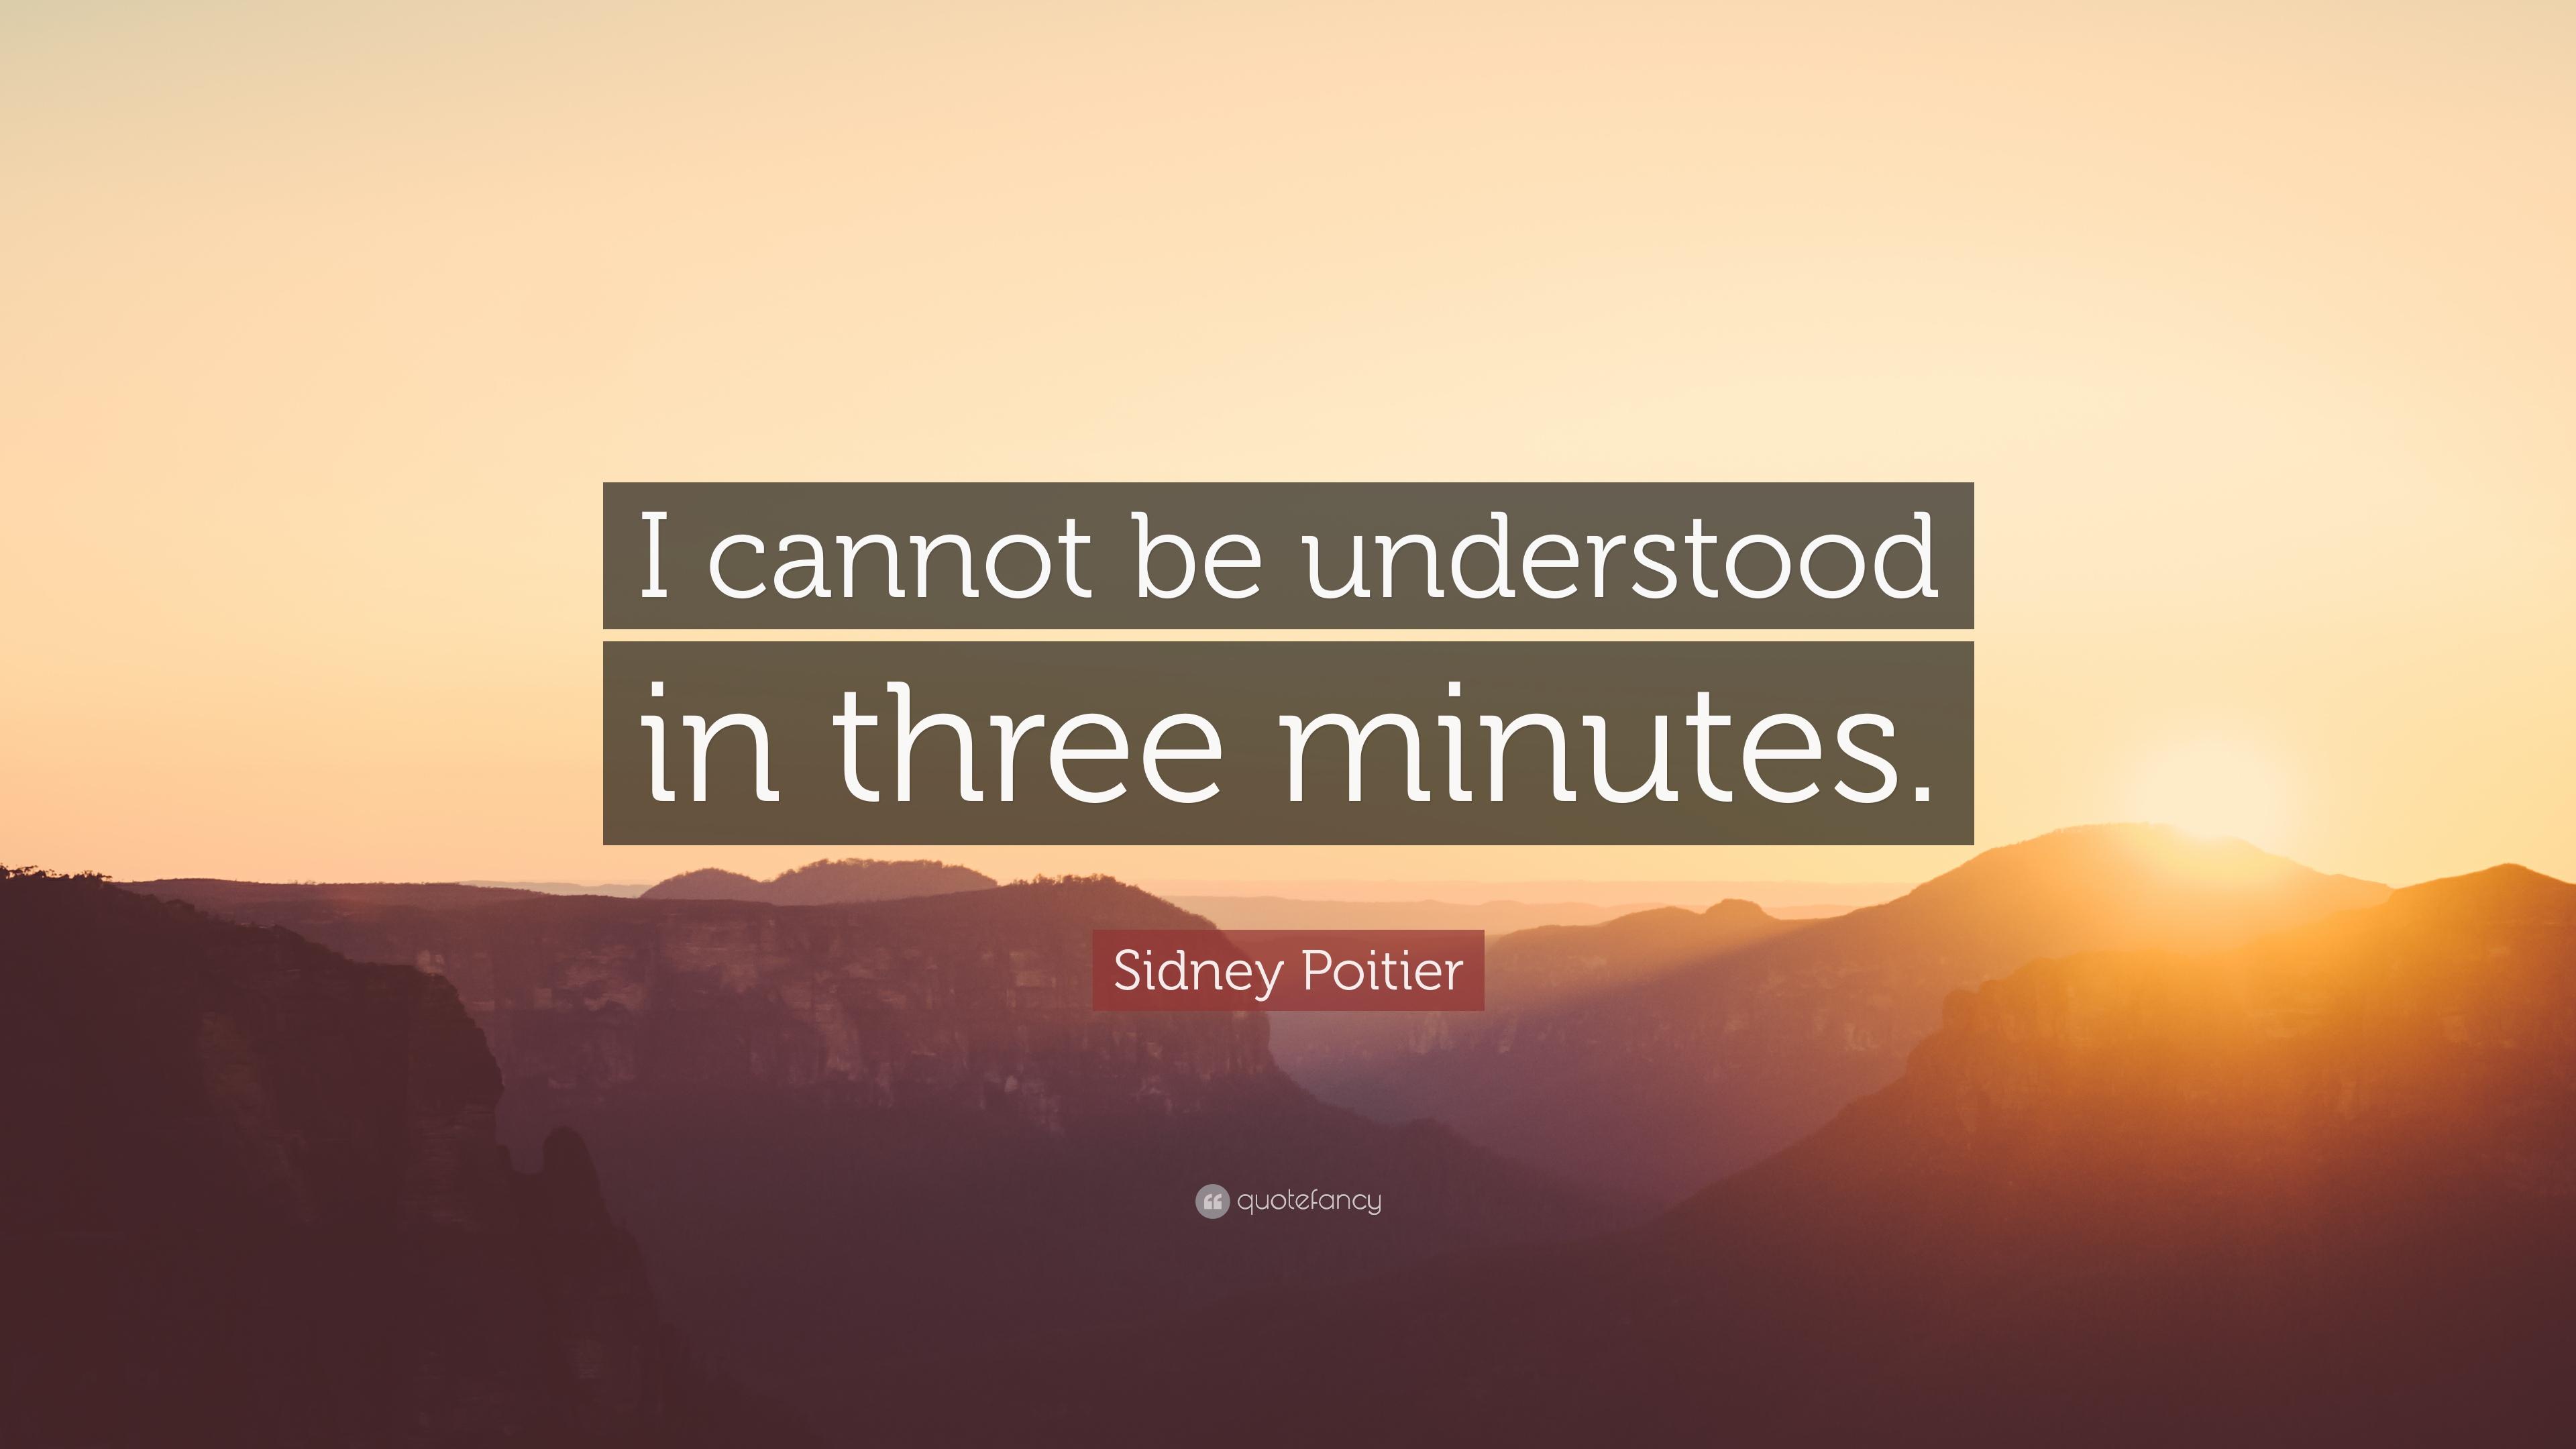 Sidney Poitier Quote: “I cannot be understood in three minutes.” 7